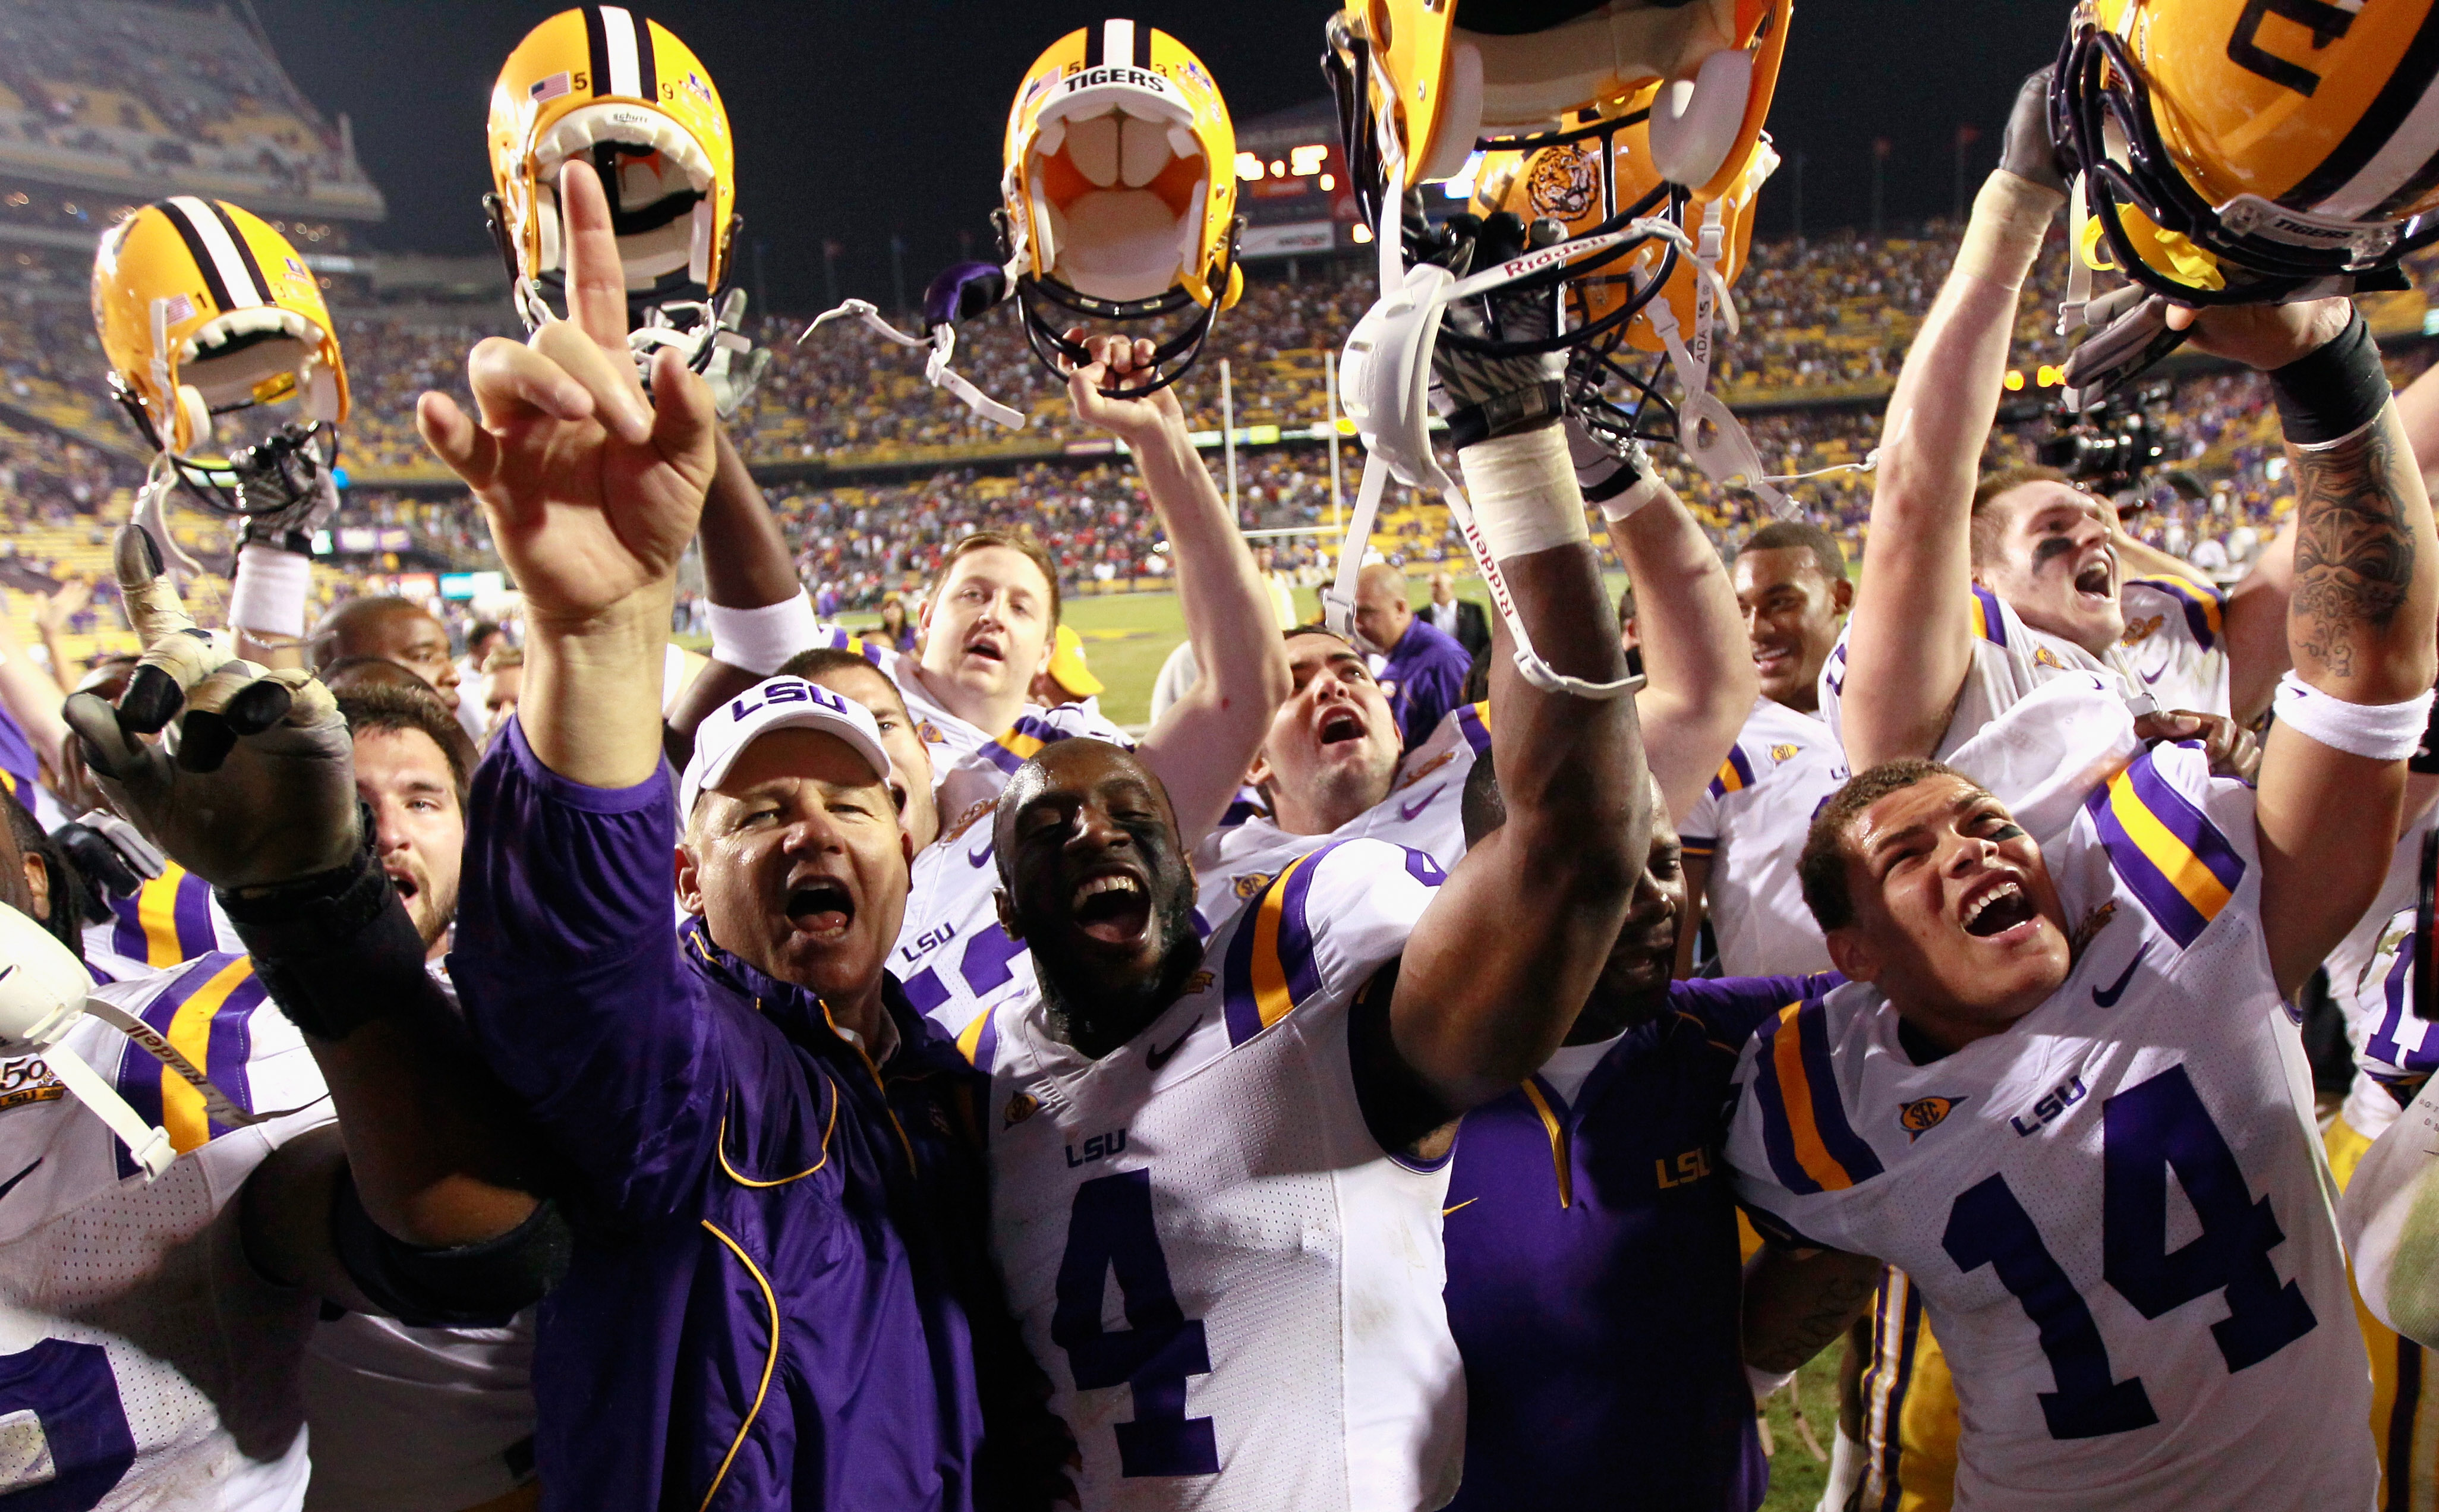 BATON ROUGE, LA - NOVEMBER 20:  Head coach Les Miles and the Louisiana State University Tigers celebrate after their 43-36 win over the Ole Miss Rebels at Tiger Stadium on November 20, 2010 in Baton Rouge, Louisiana.  (Photo by Kevin C. Cox/Getty Images)